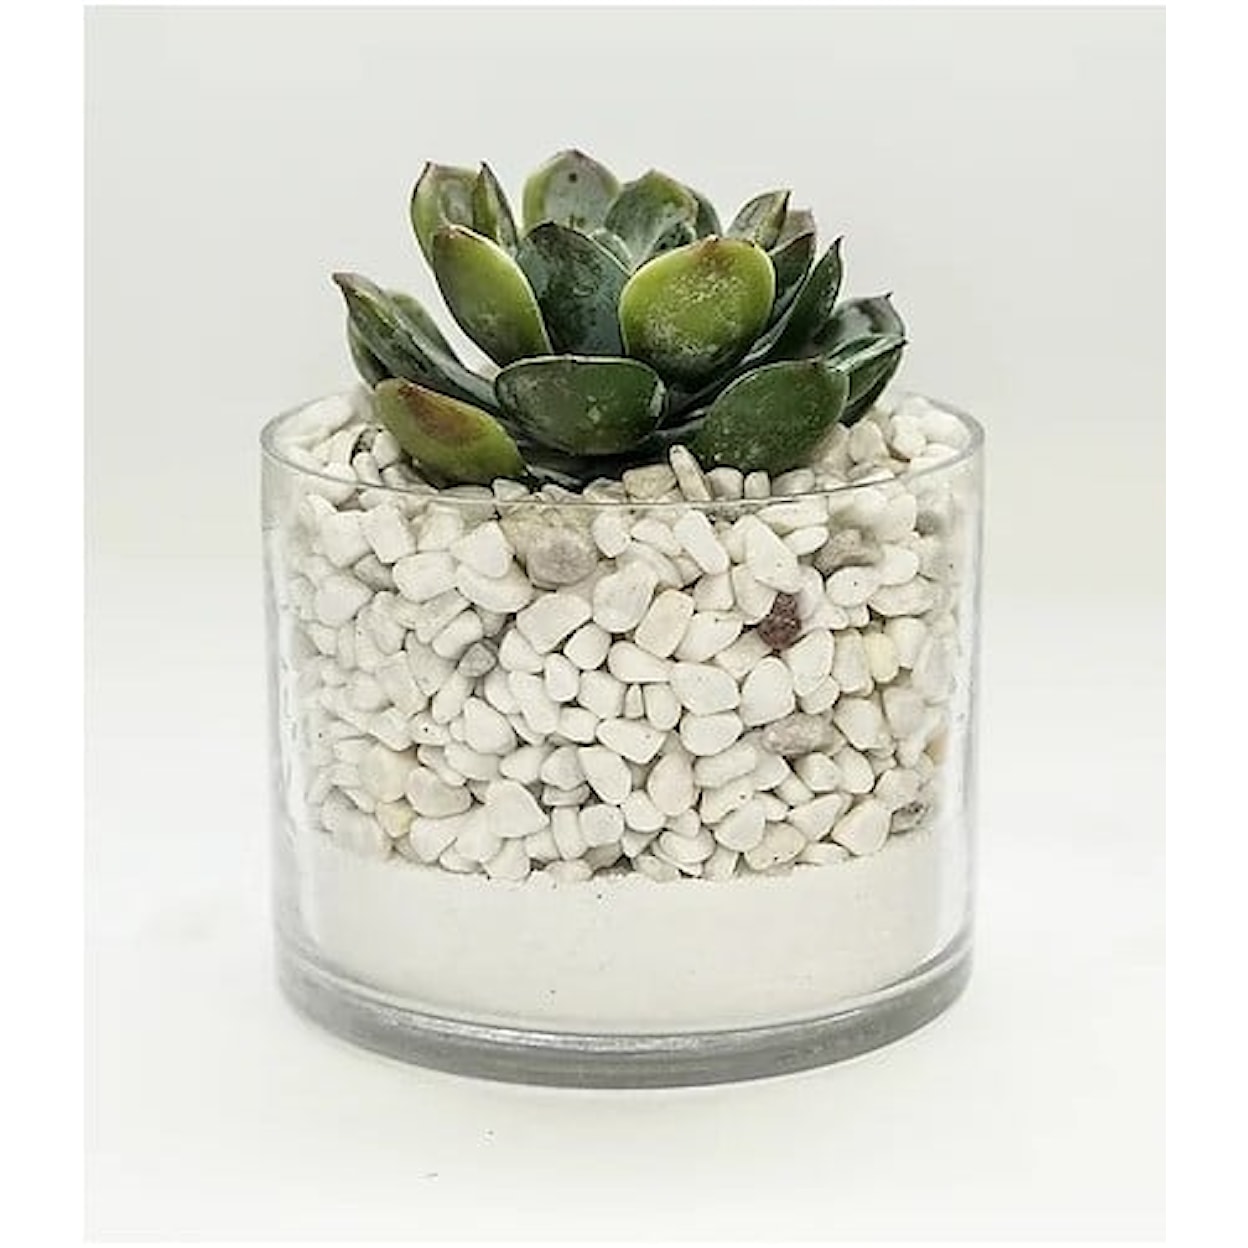 The Ivy Guild Succulents Ech In Glass White Sand/Rocks